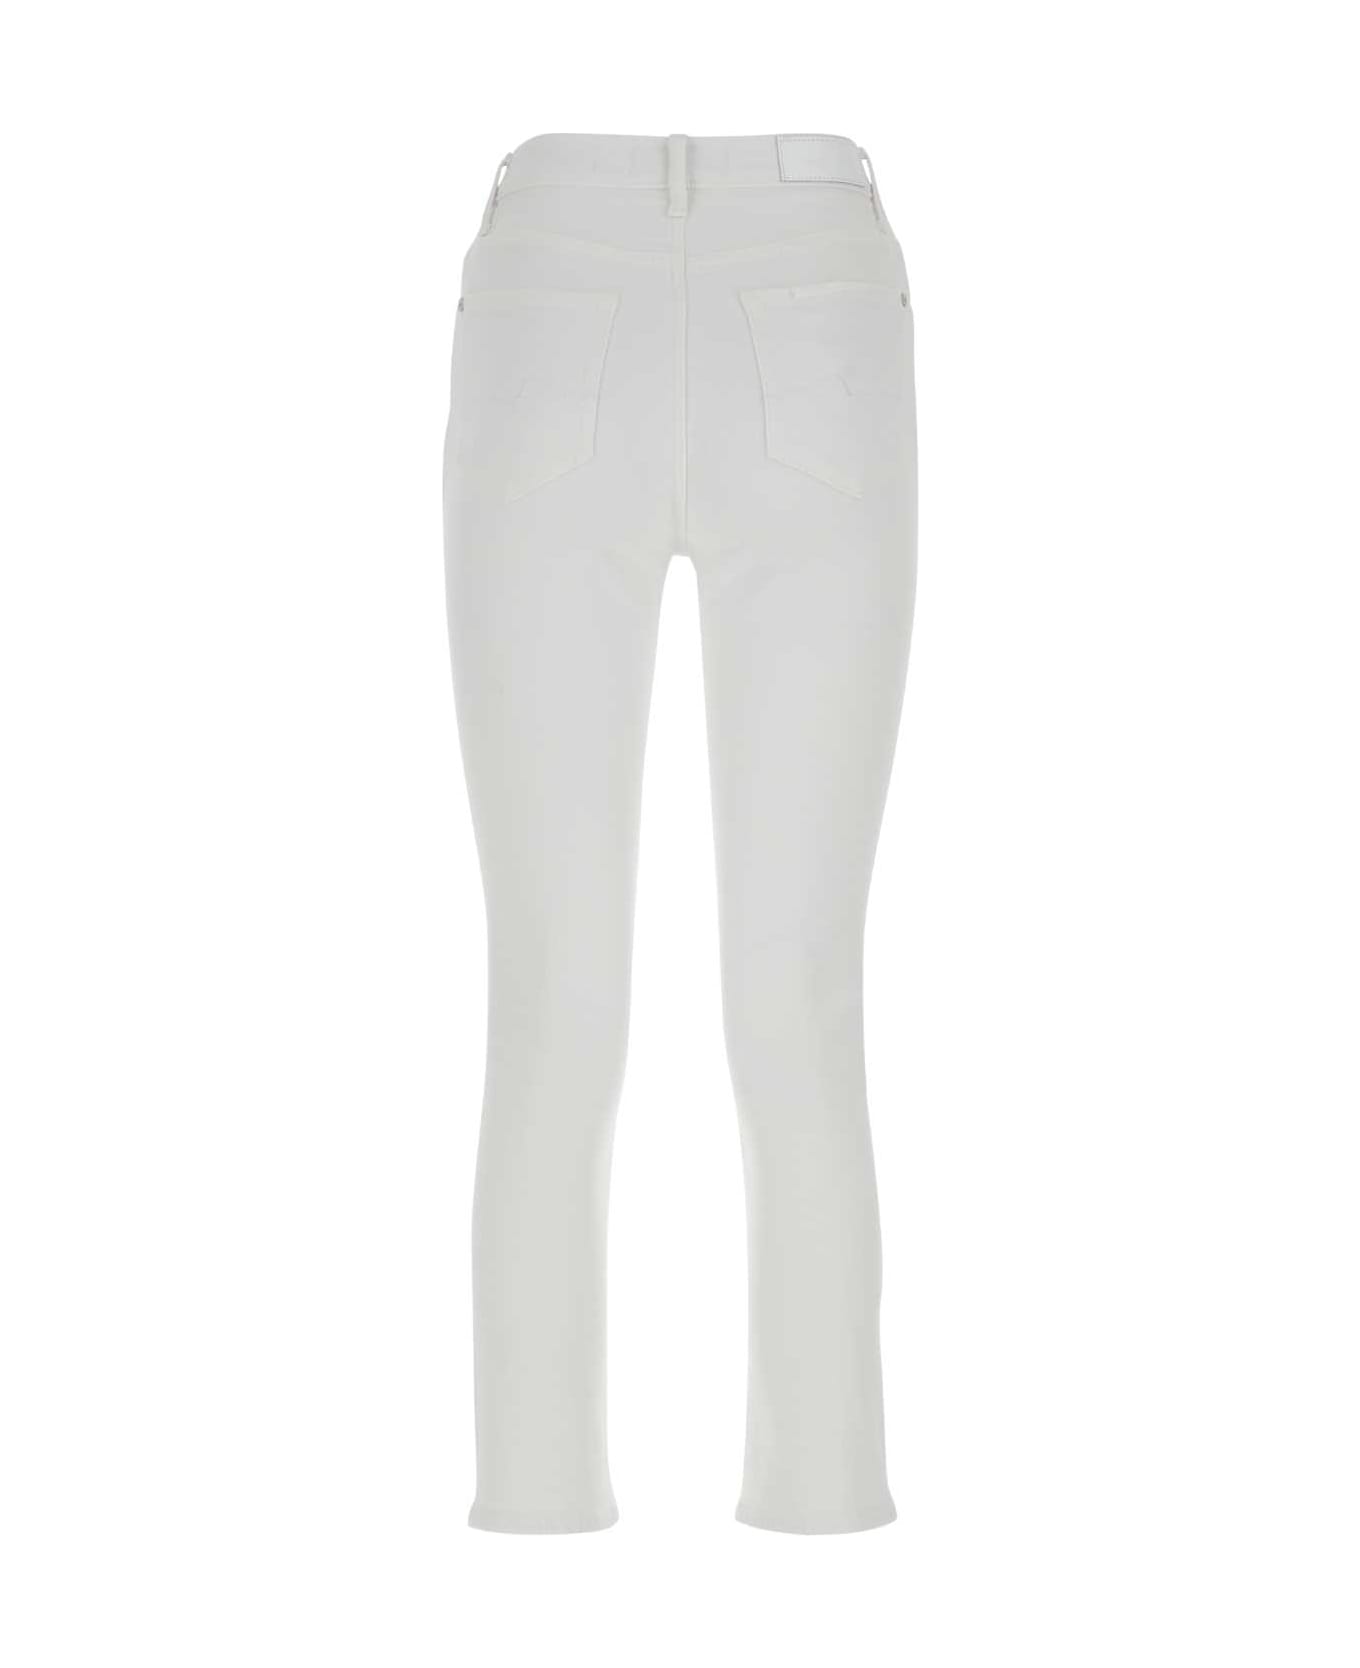 7 For All Mankind White Stretch Cotton Blend Luxe Vintage Jeans - LUXVINWHI